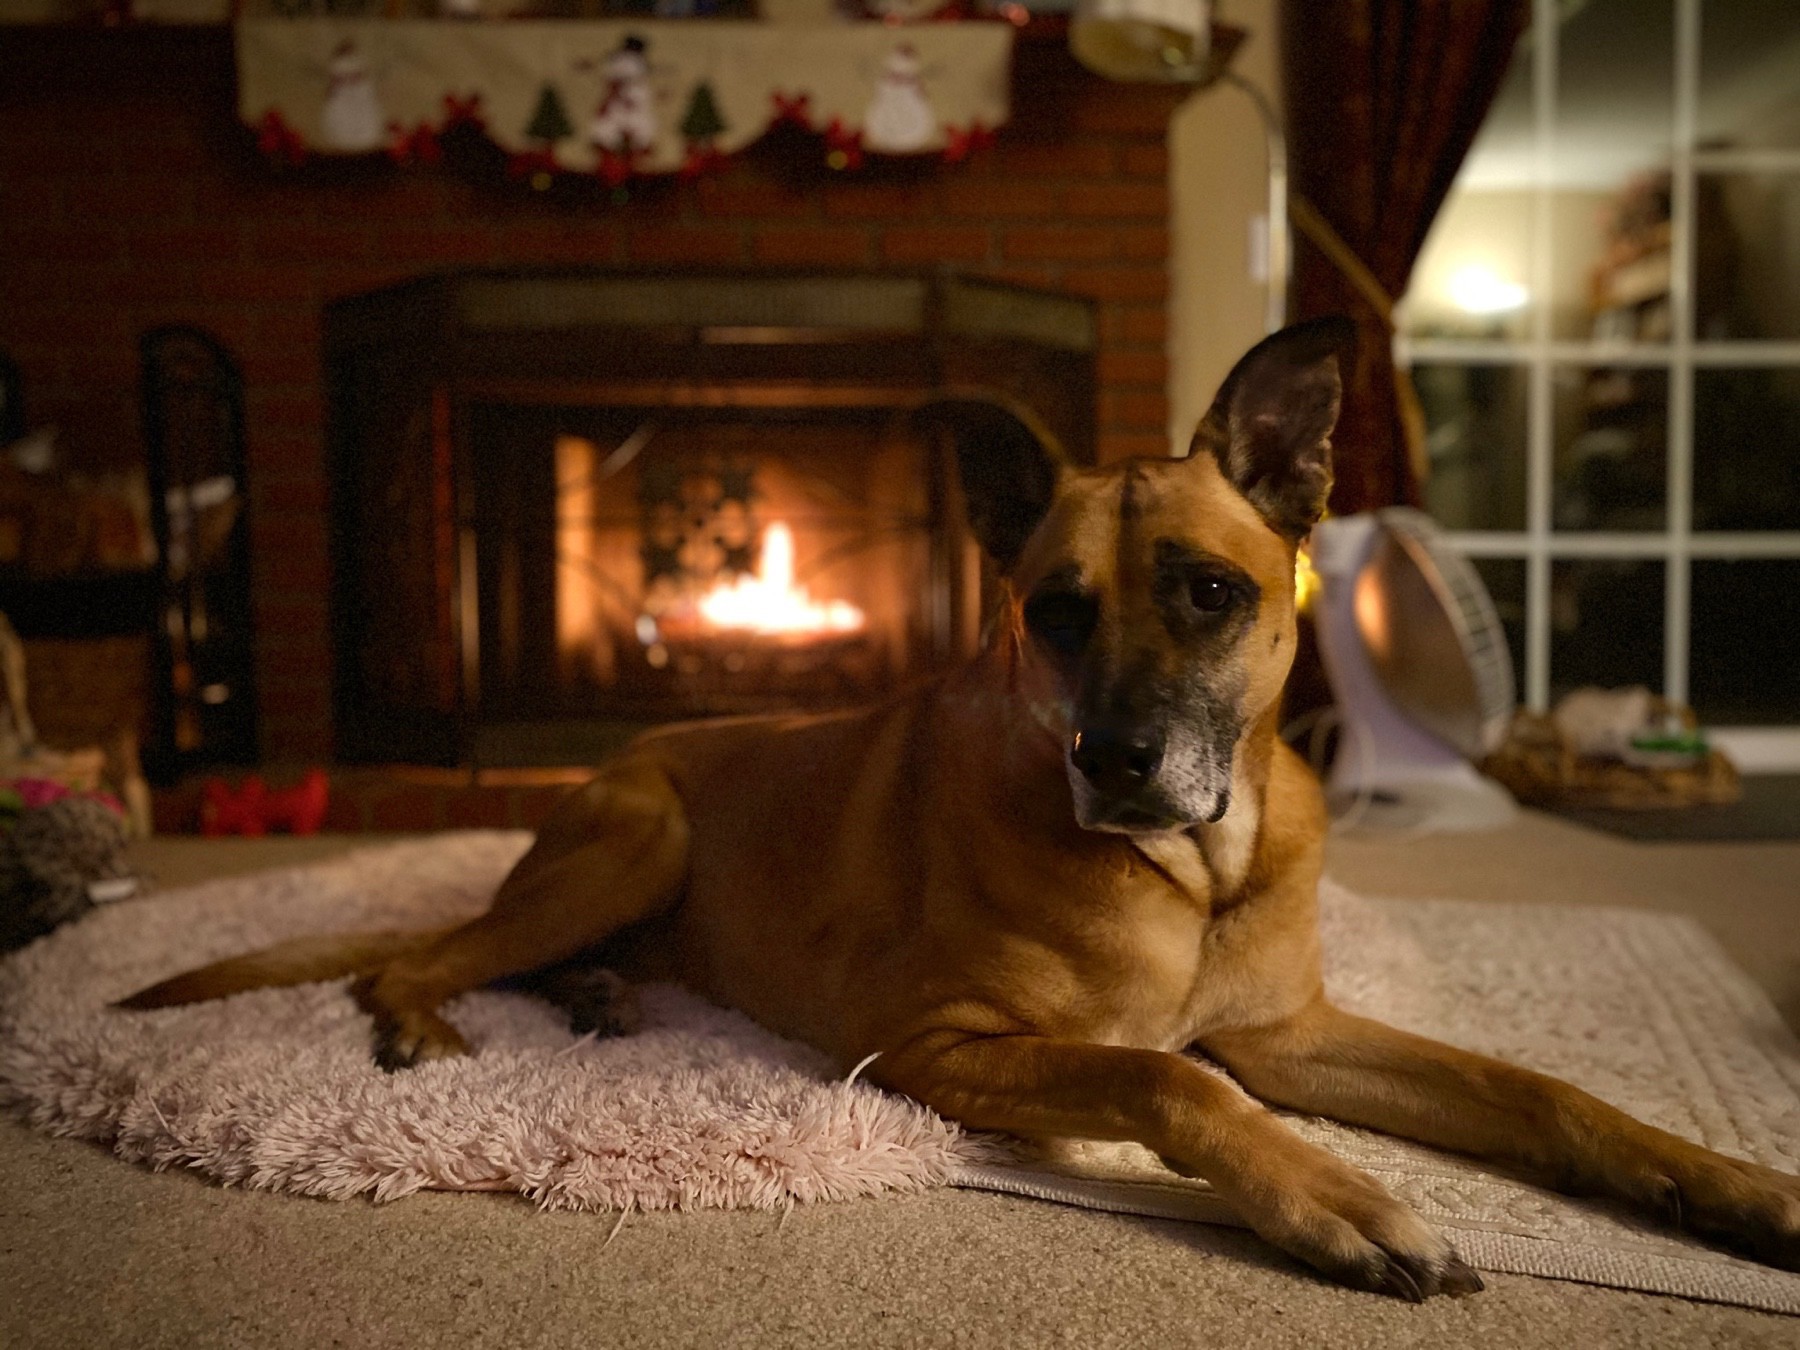 A large dog lying on a fake fur rug in front of a crackling fire.